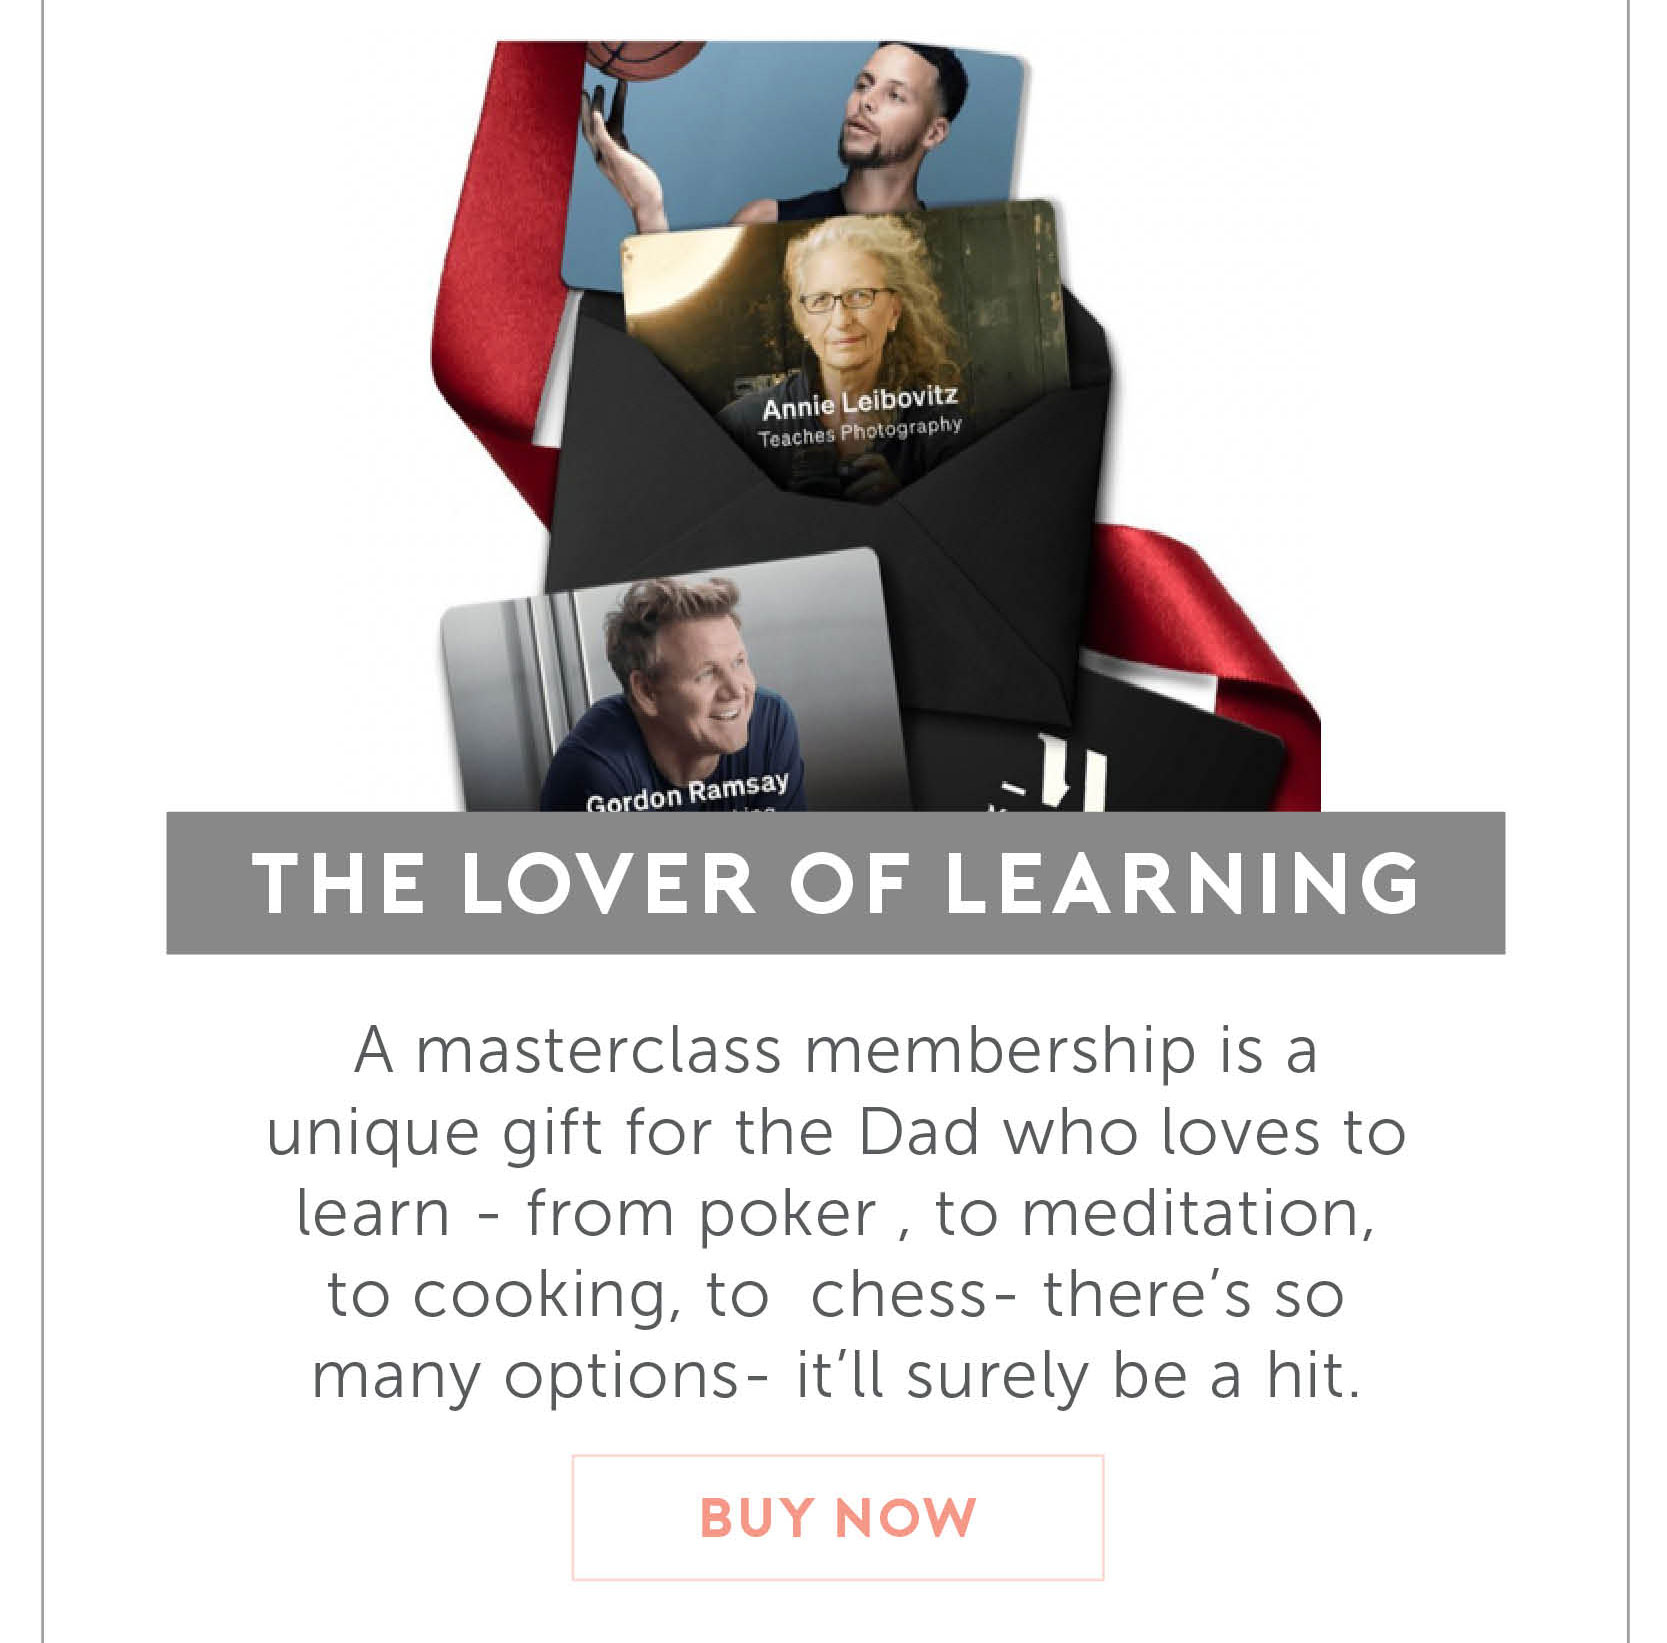 For the Dad who Loves to Learn. A masterclass membership is a unique gift for the Dad who loves to learn - from poker , to meditation, to cooking, to chess- there's so many options- it'll surely be a hit.